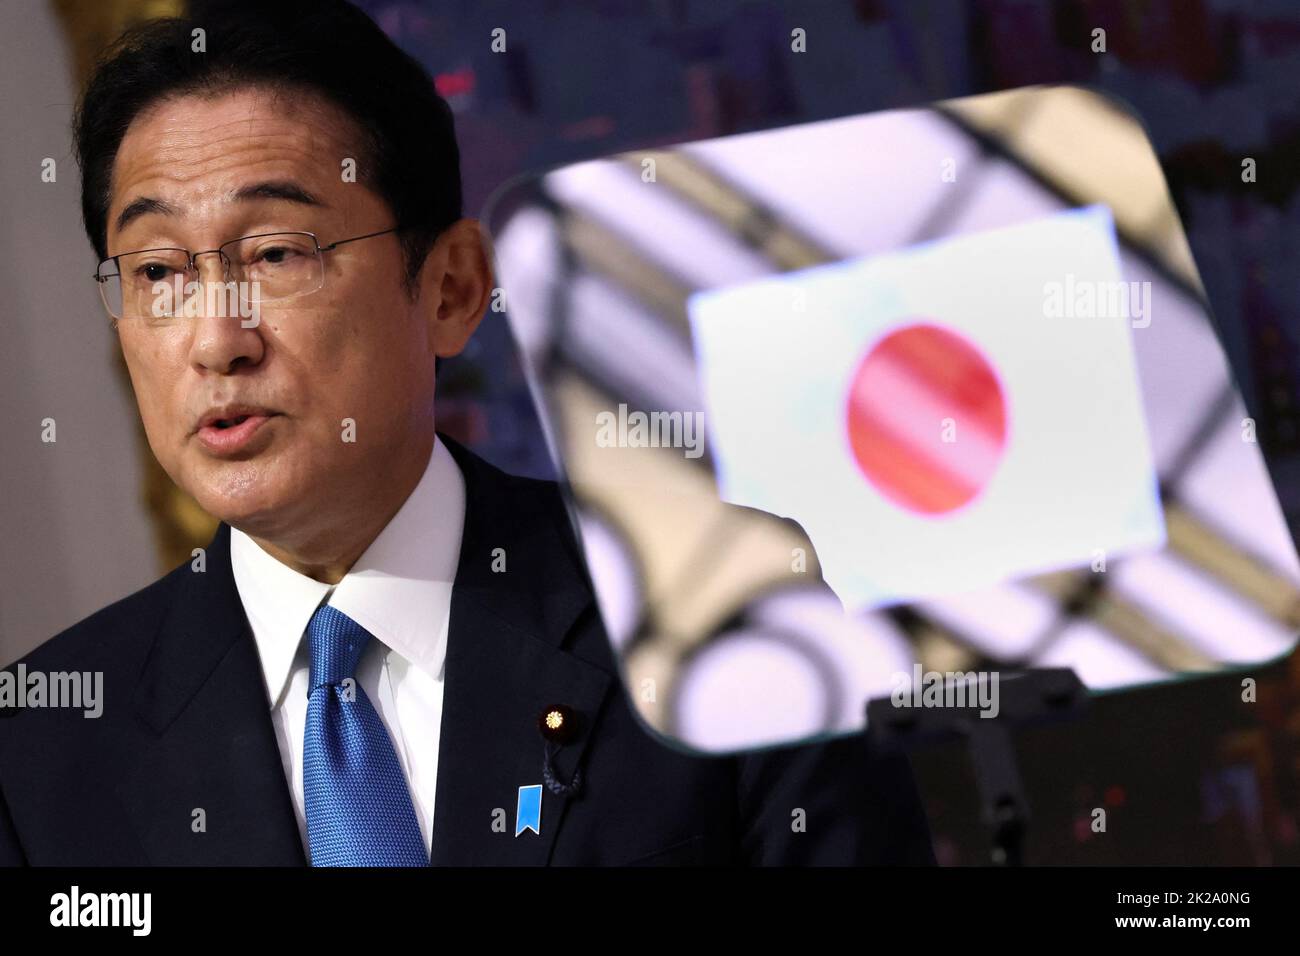 Japanese Prime Minister Fumio Kishida speaks during a news conference at the New York Stock Exchange (NYSE) on the sidelines of the 77th Session of the United Nations General Assembly in New York, U.S., September 22, 2022. REUTERS/Brendan McDermid Stock Photo